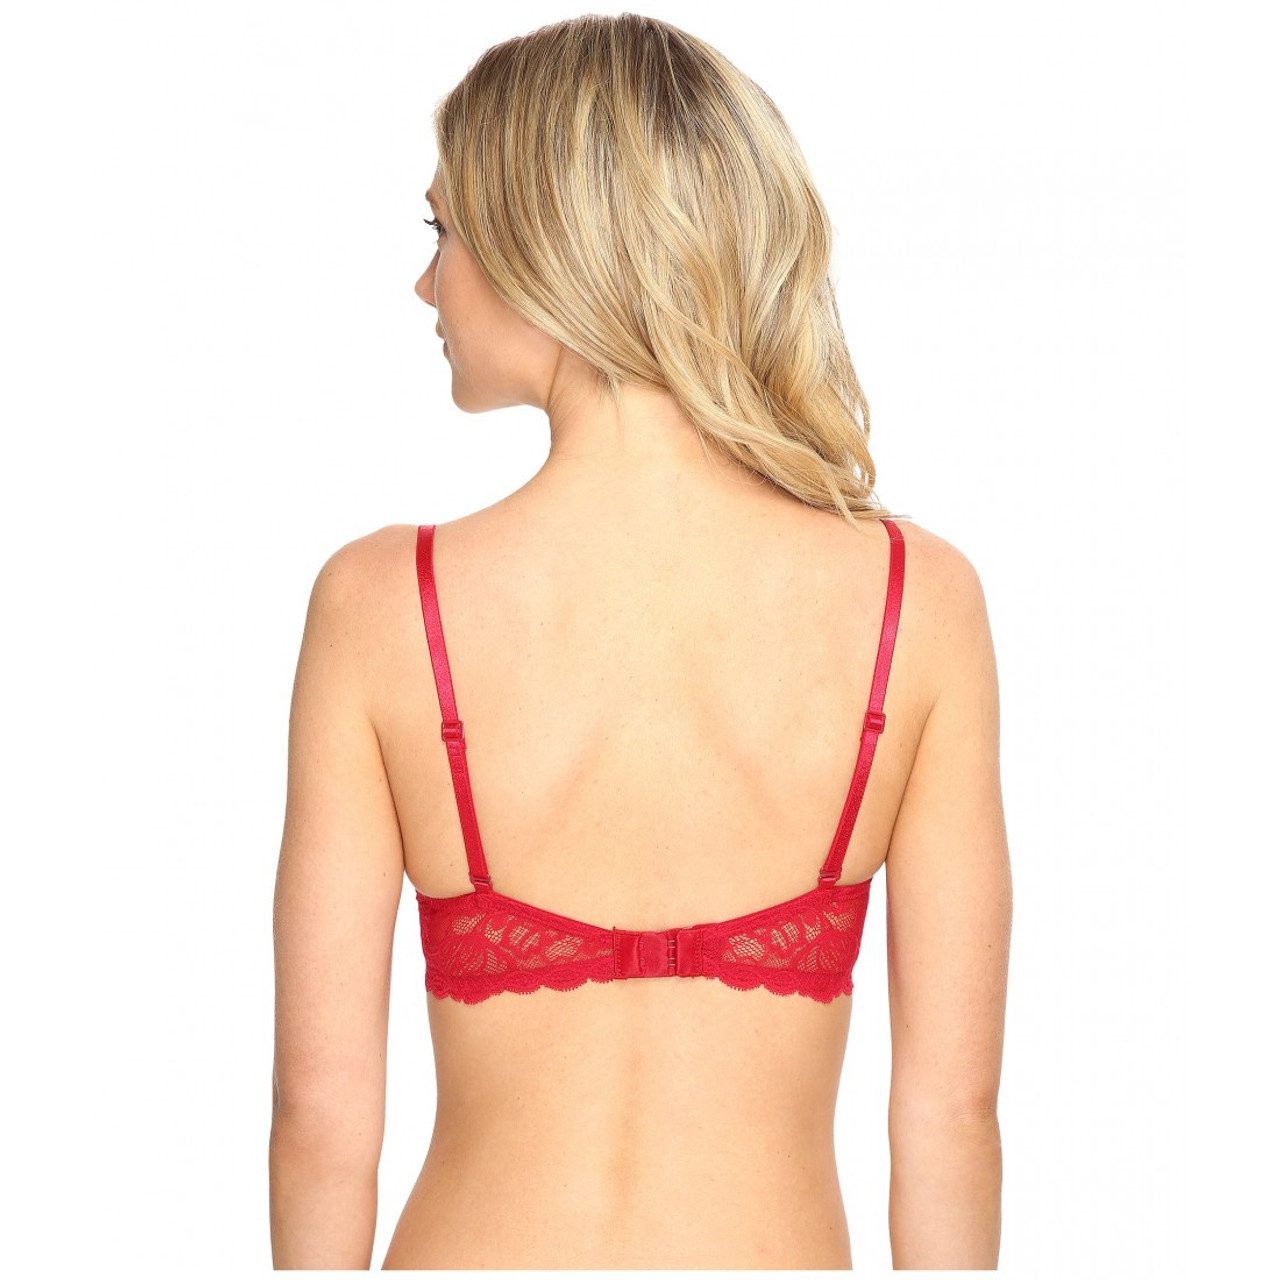 Calvin Klein Seductive Comfort with Lace Demi Bra in Regal Red FINAL SALE  NORMALLY $52